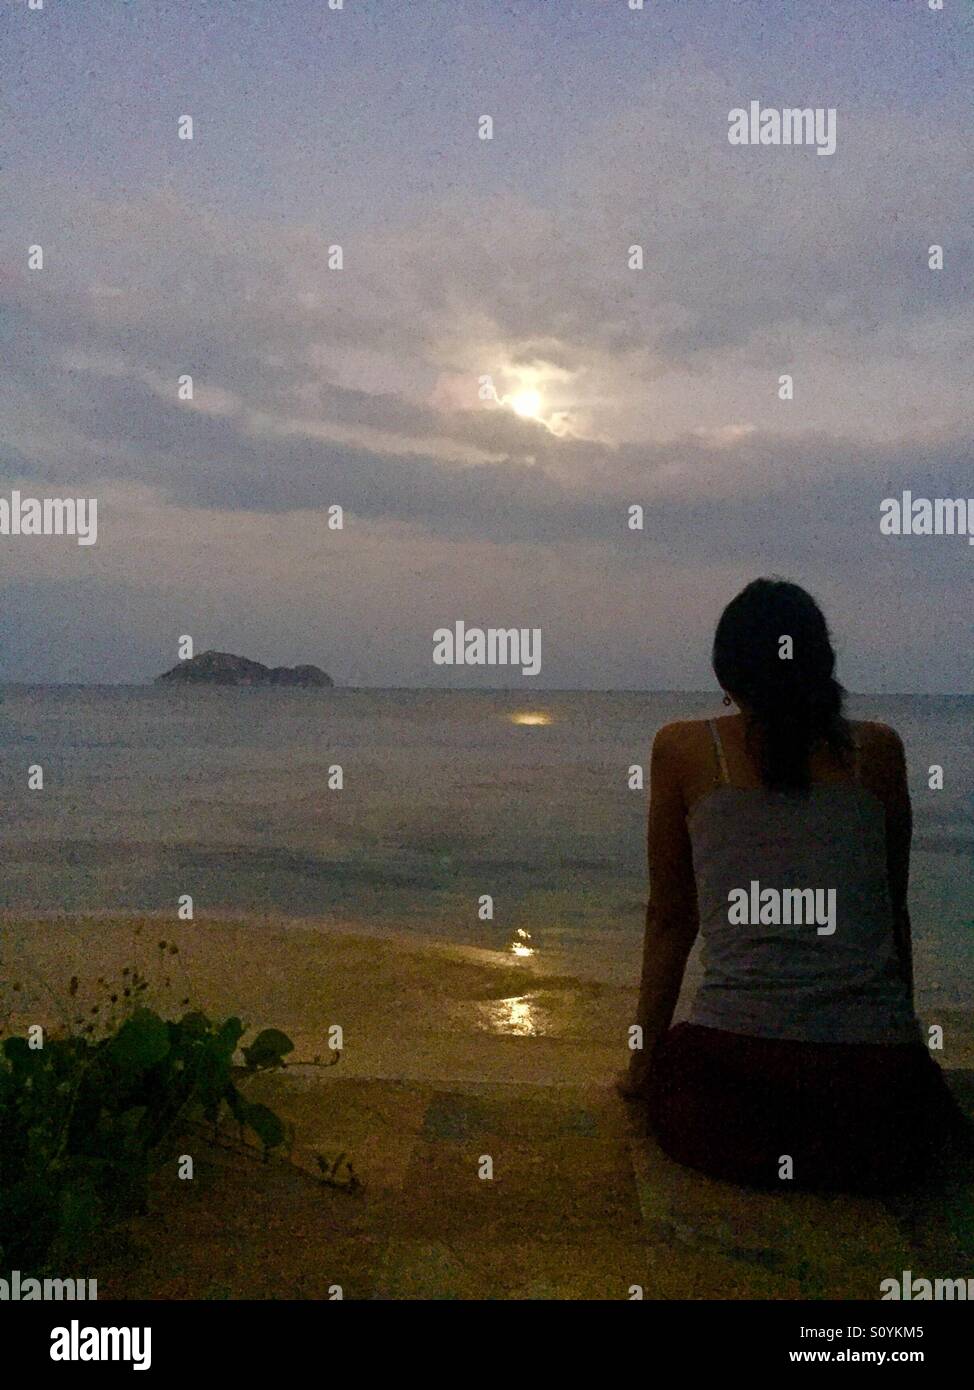 My friend Nueng watches the moon, just as the break of dawn sets on the island of Koh Phangan in Thailand. Stock Photo